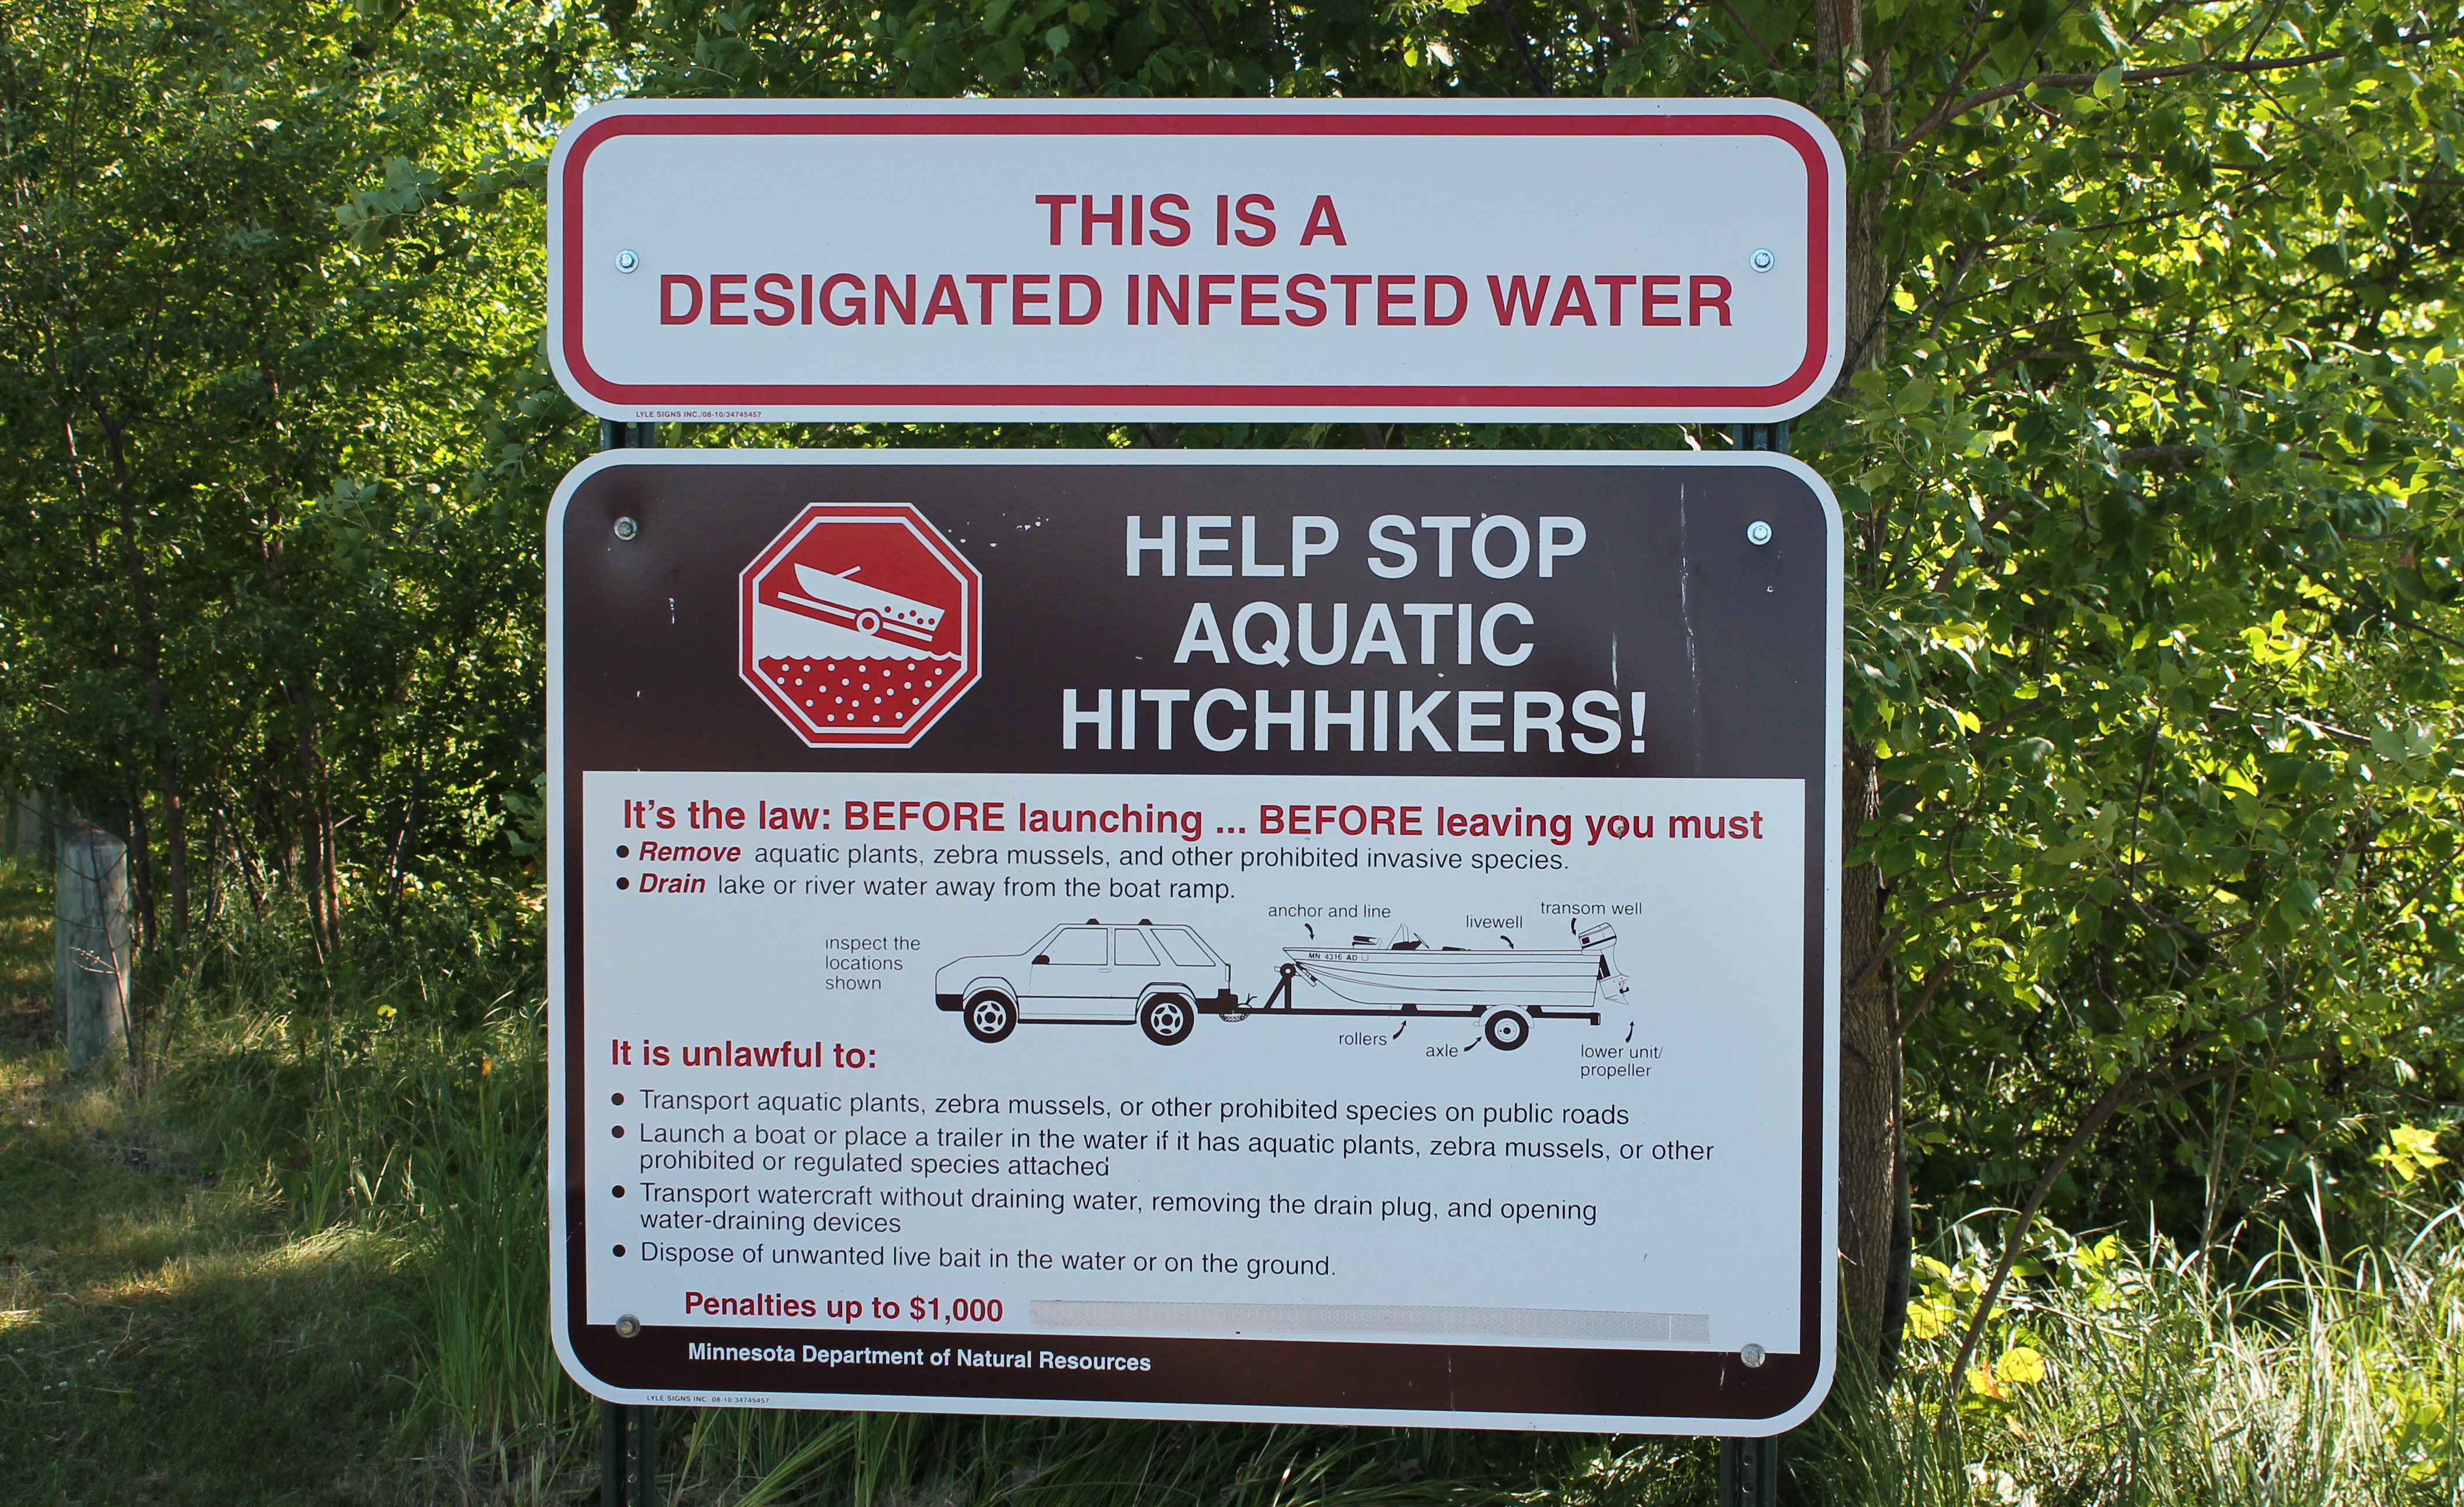 Sign that reads "This is a designated infested water, Help stop aquatic hitchhikers!"